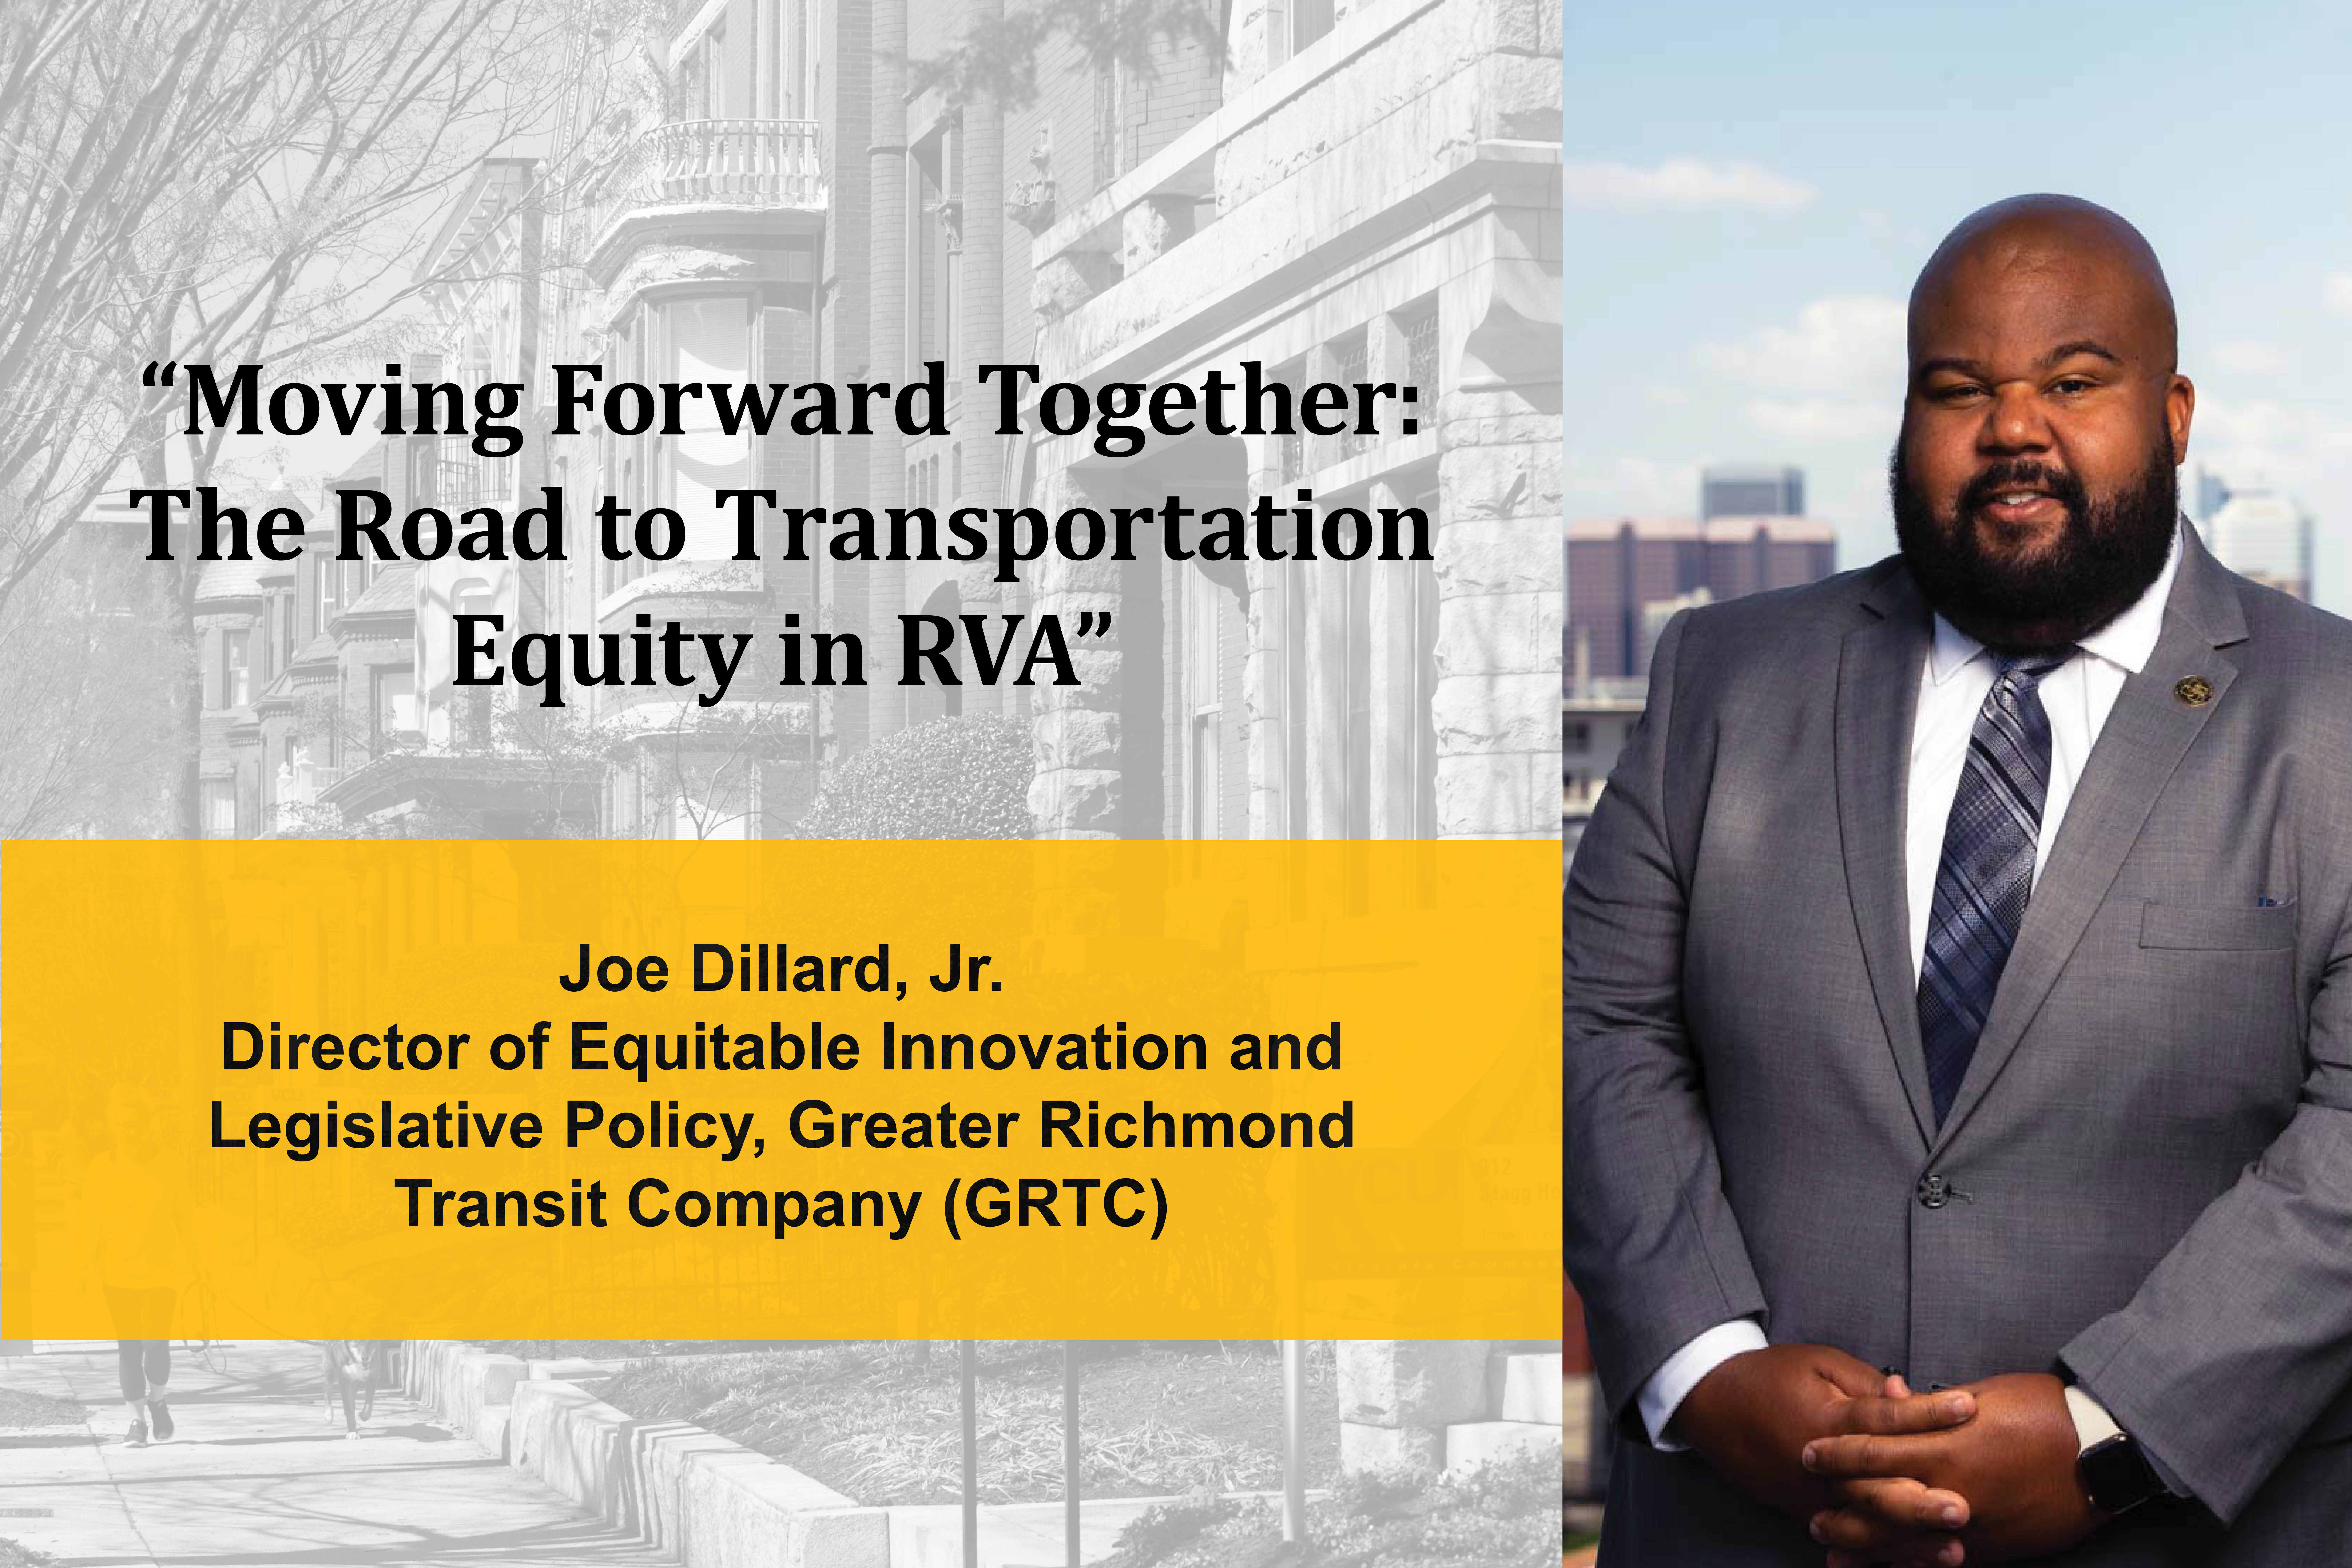 Join Joe Dillard, Jr., Director of Equitable Innovation and Legislative Policy for the Greater Richmond Transit Company.